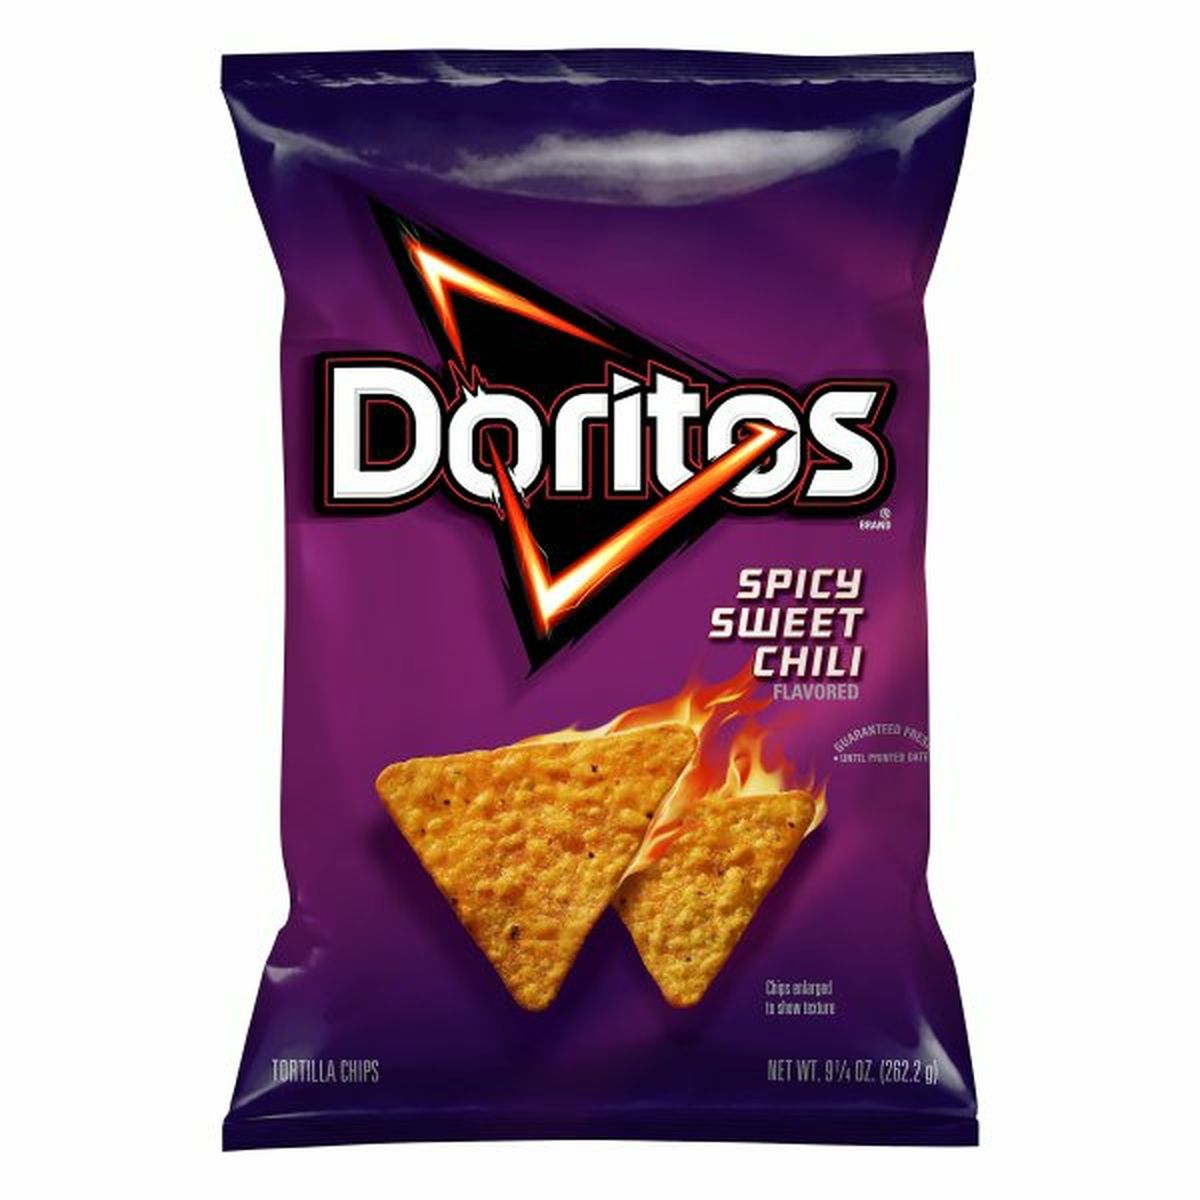 Calories in Doritos Tortilla Chips, Spicy Sweet Chili Flavored